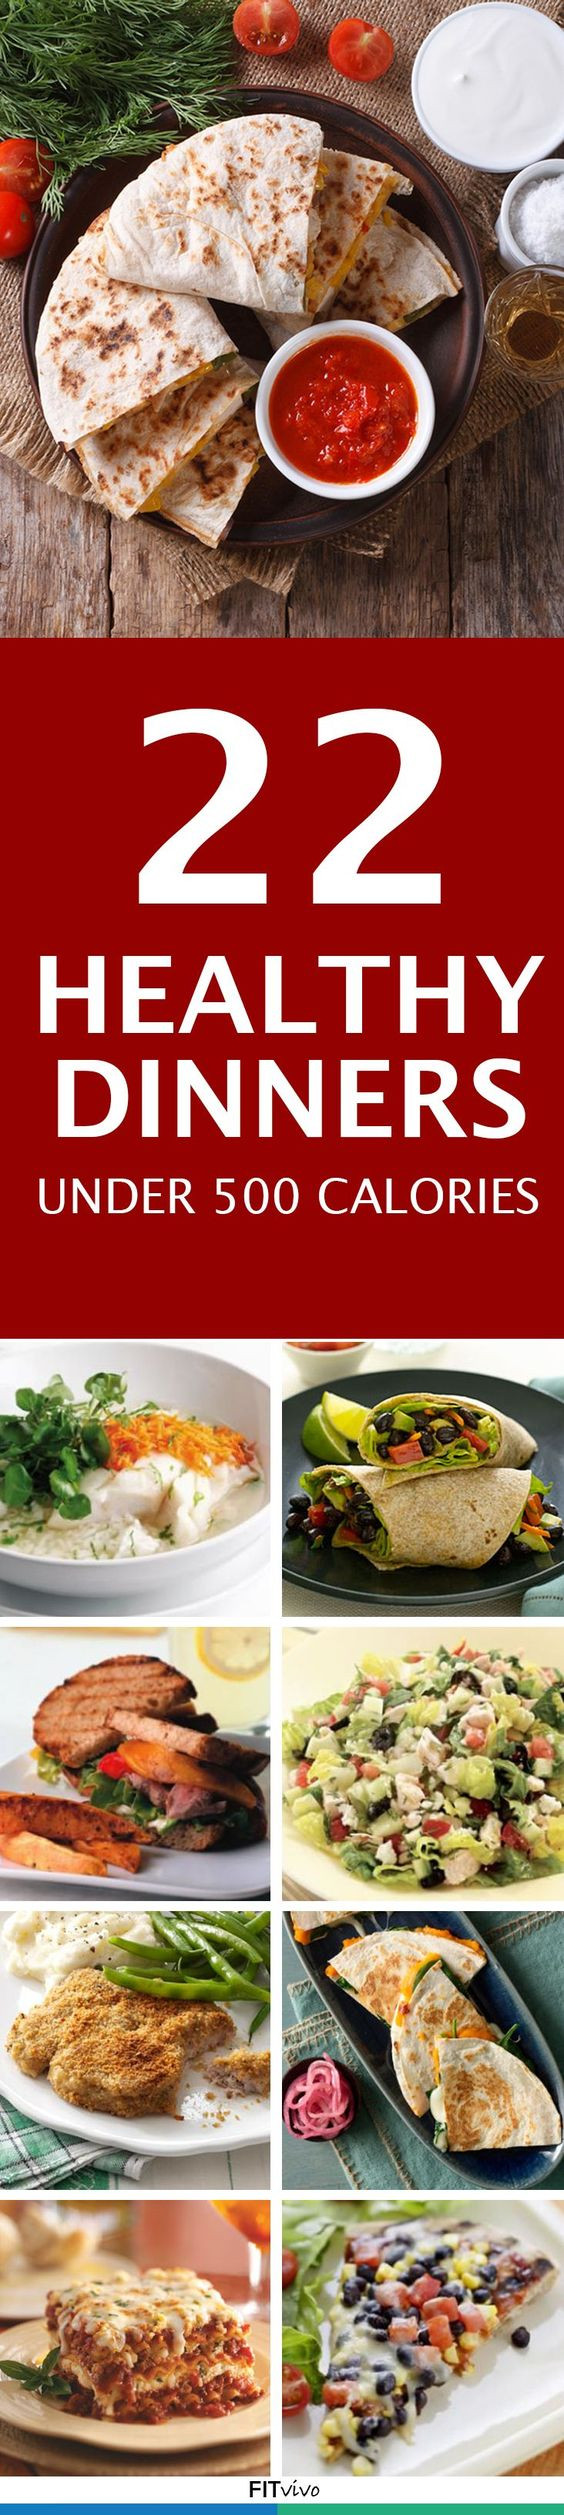 Light Dinner Recipes For Weight Loss
 Healthy Dinner Recipes 22 Meal Recipes Under 500